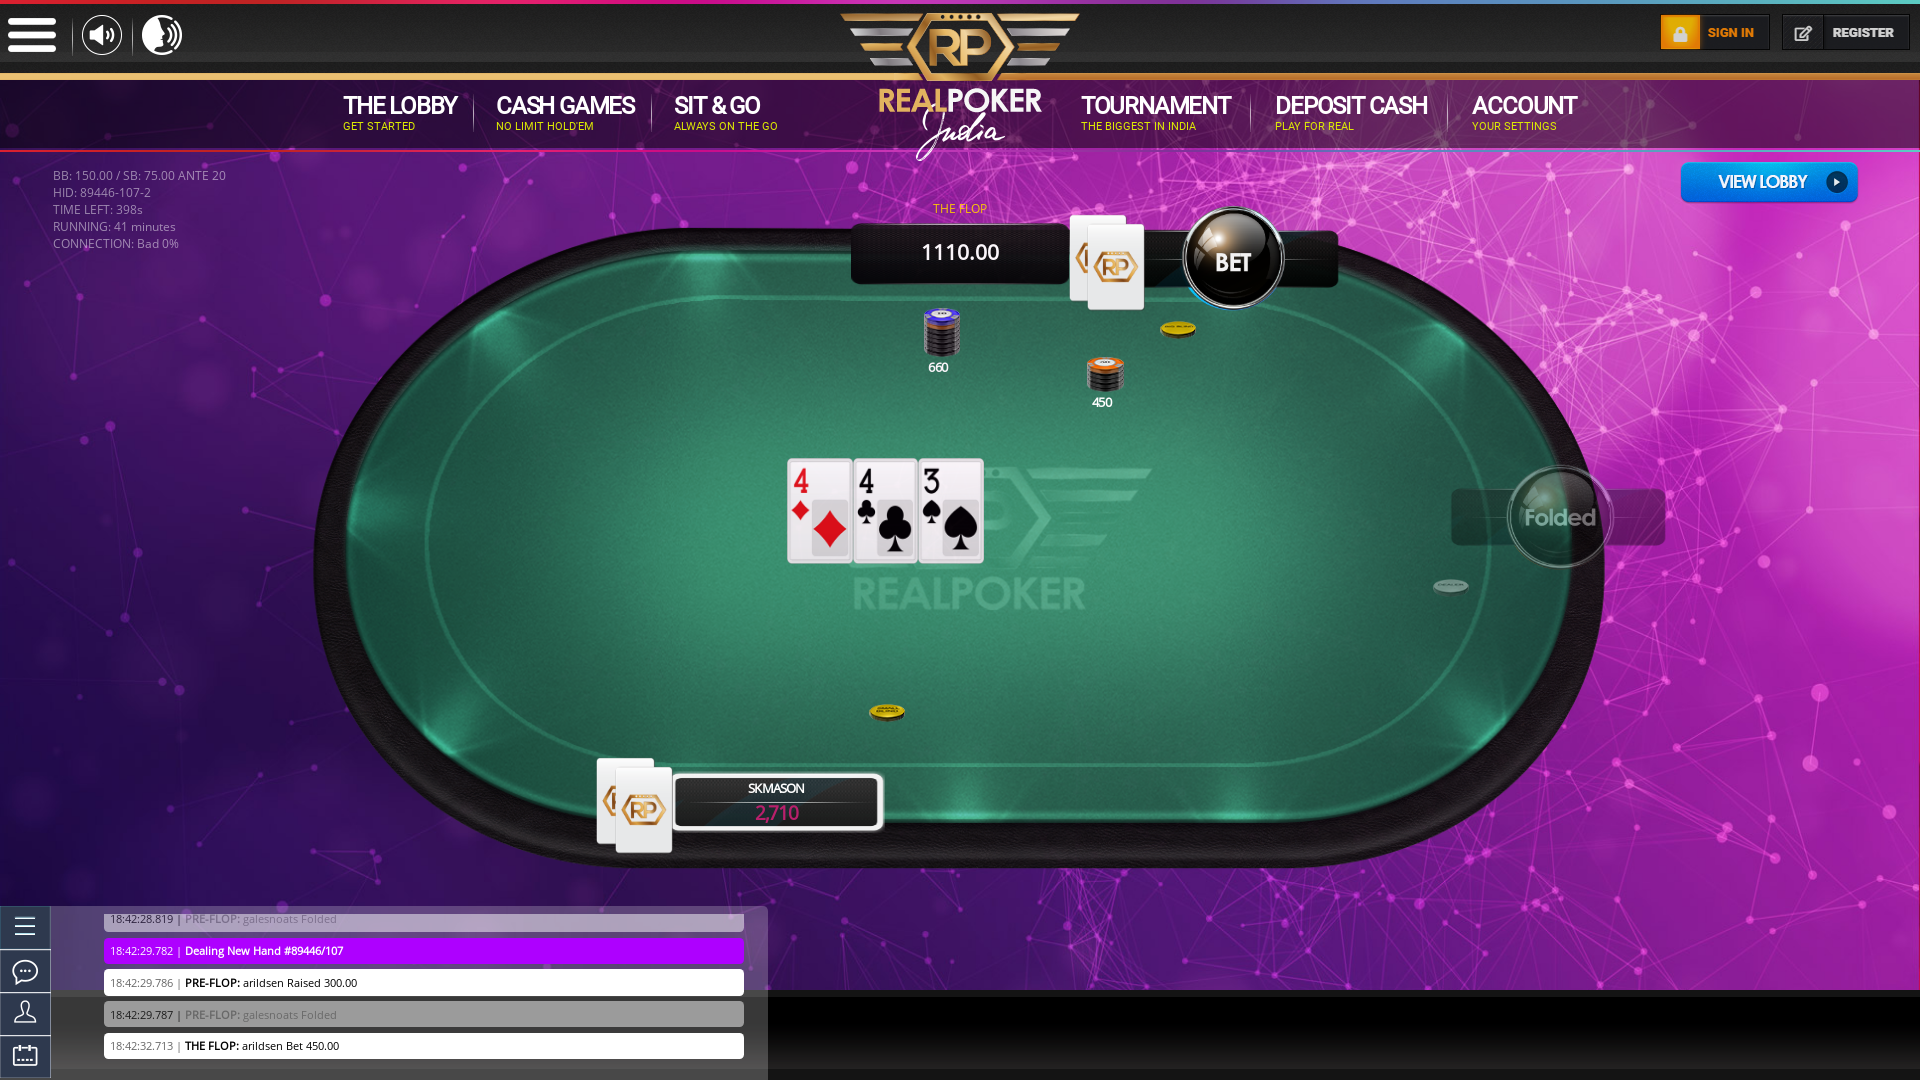 Indian poker on a 6 player table in the 41st minute